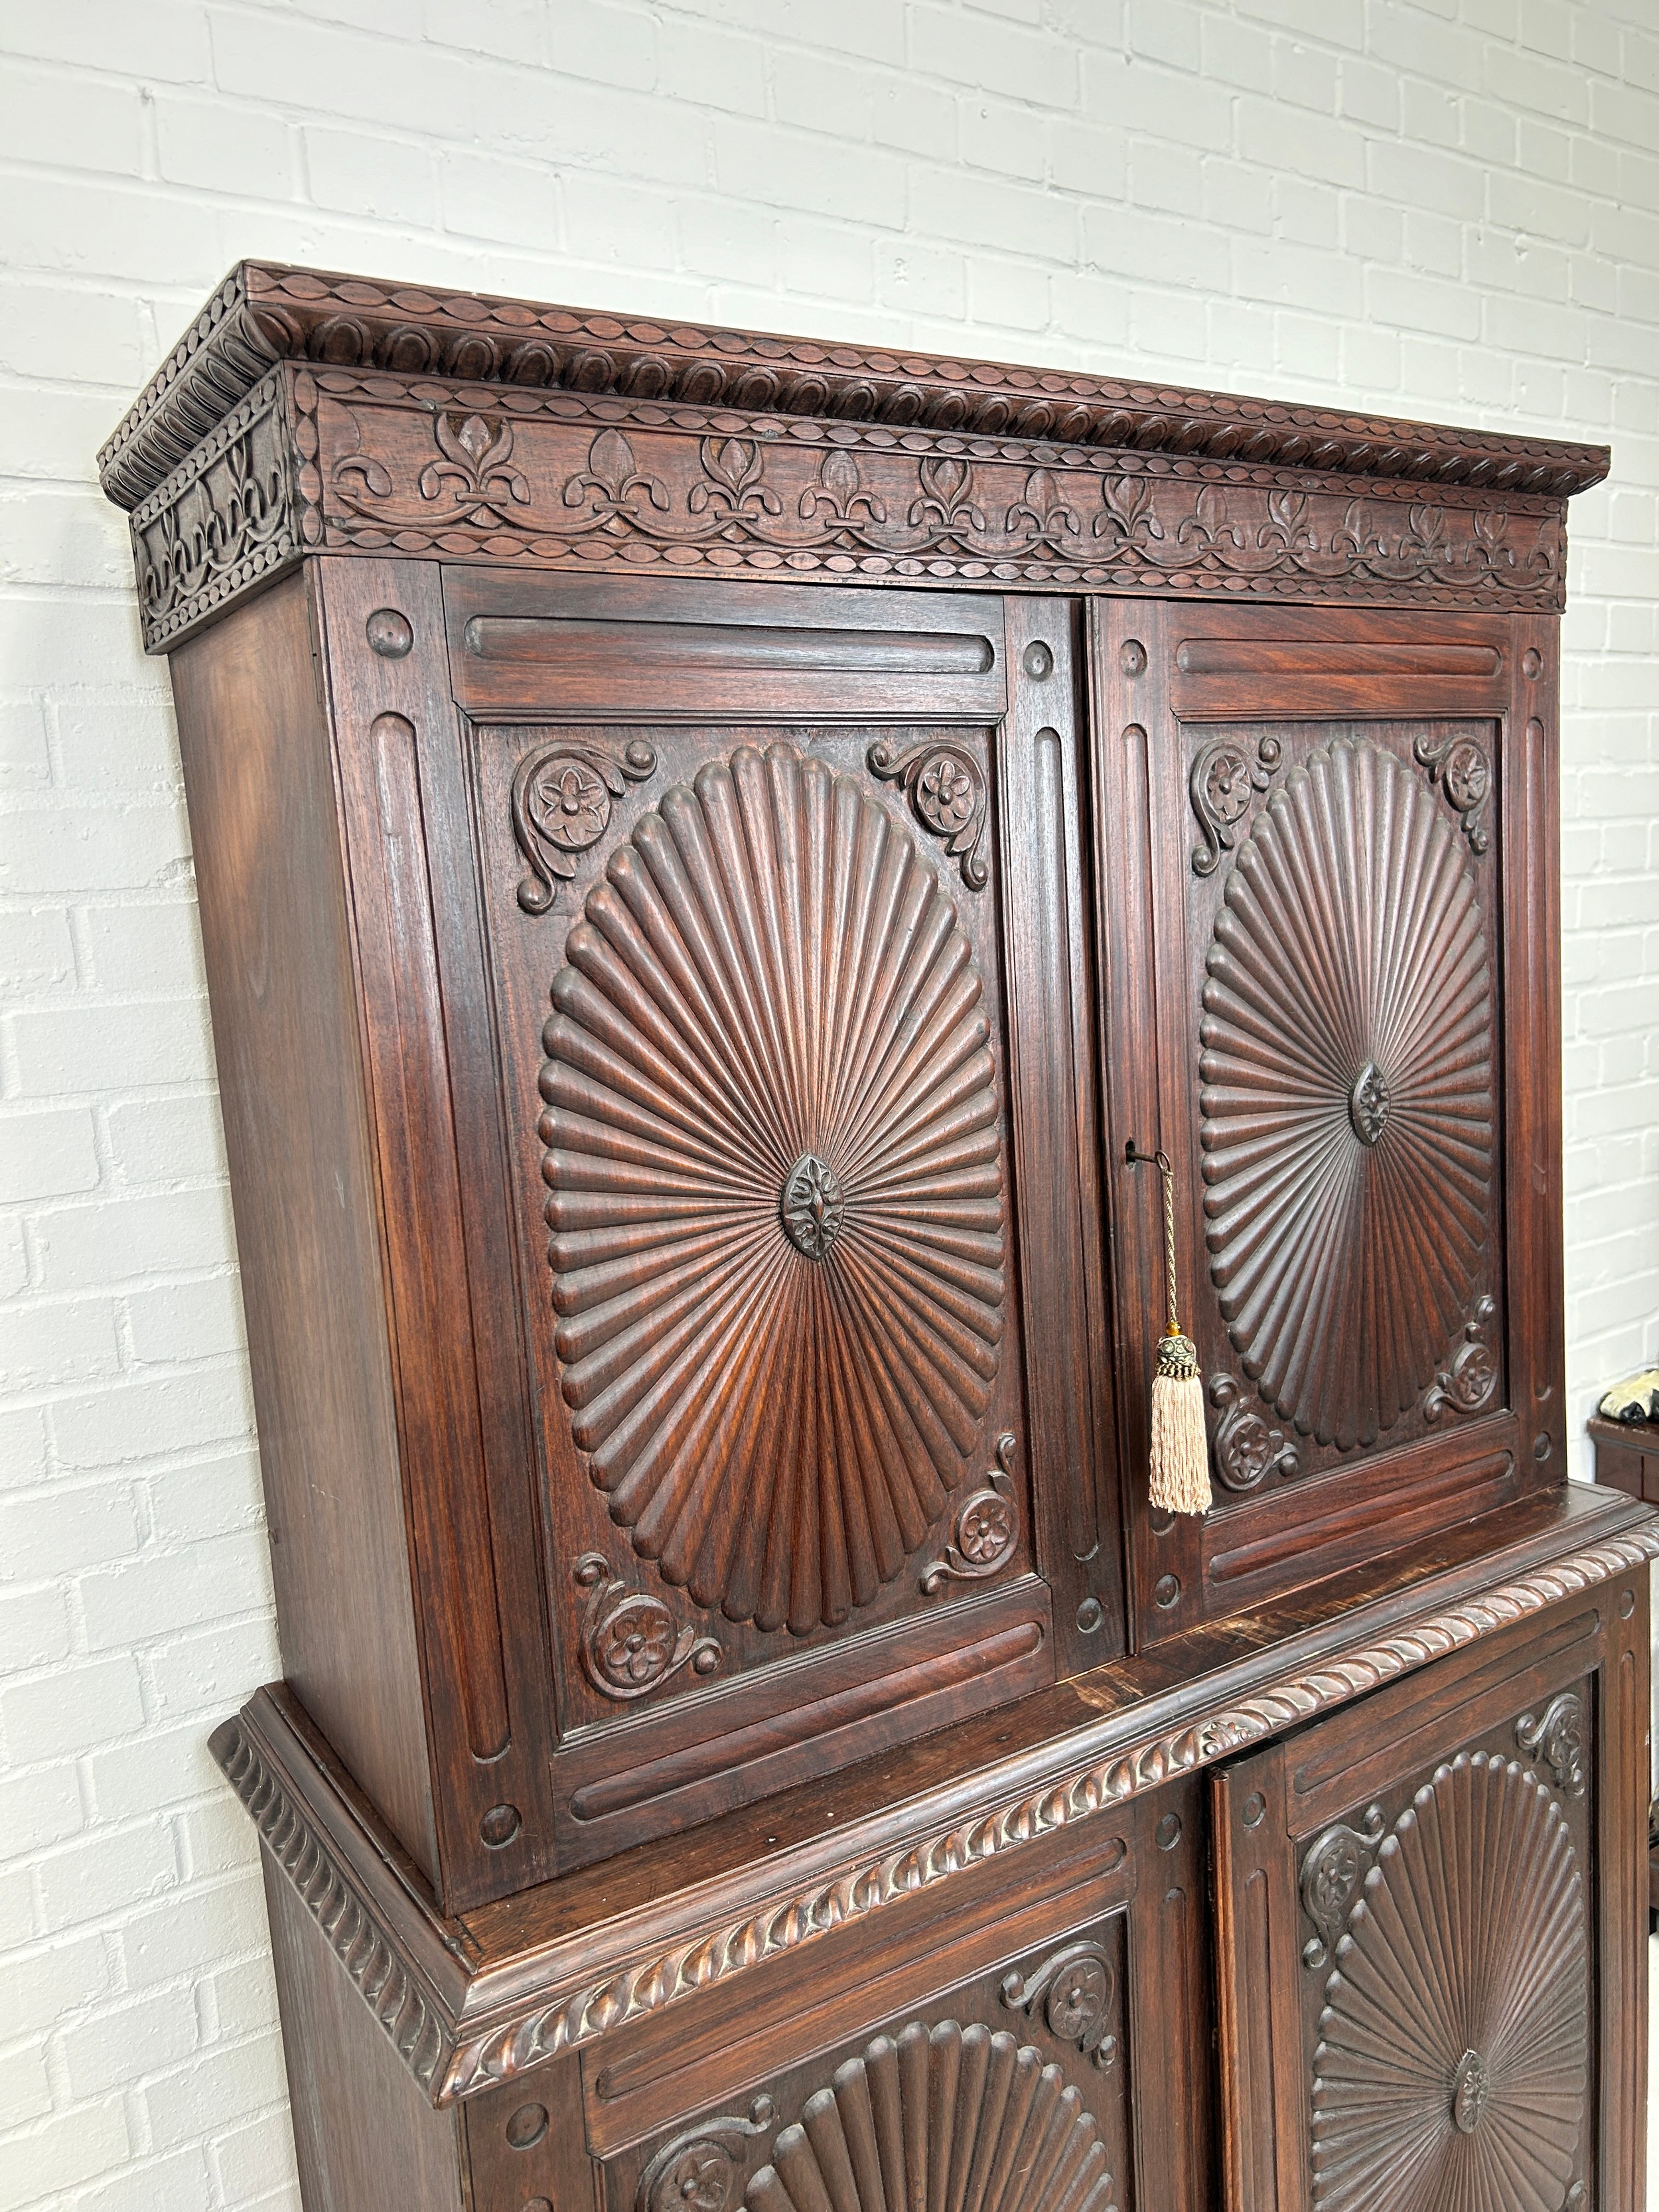 A 19TH CENTURY ANGLO INDIAN ROSEWOOD SECTIONAL WARDROBE WITH SUNBURST DESIGN PANELS, 194cm x 120cm x - Image 7 of 9